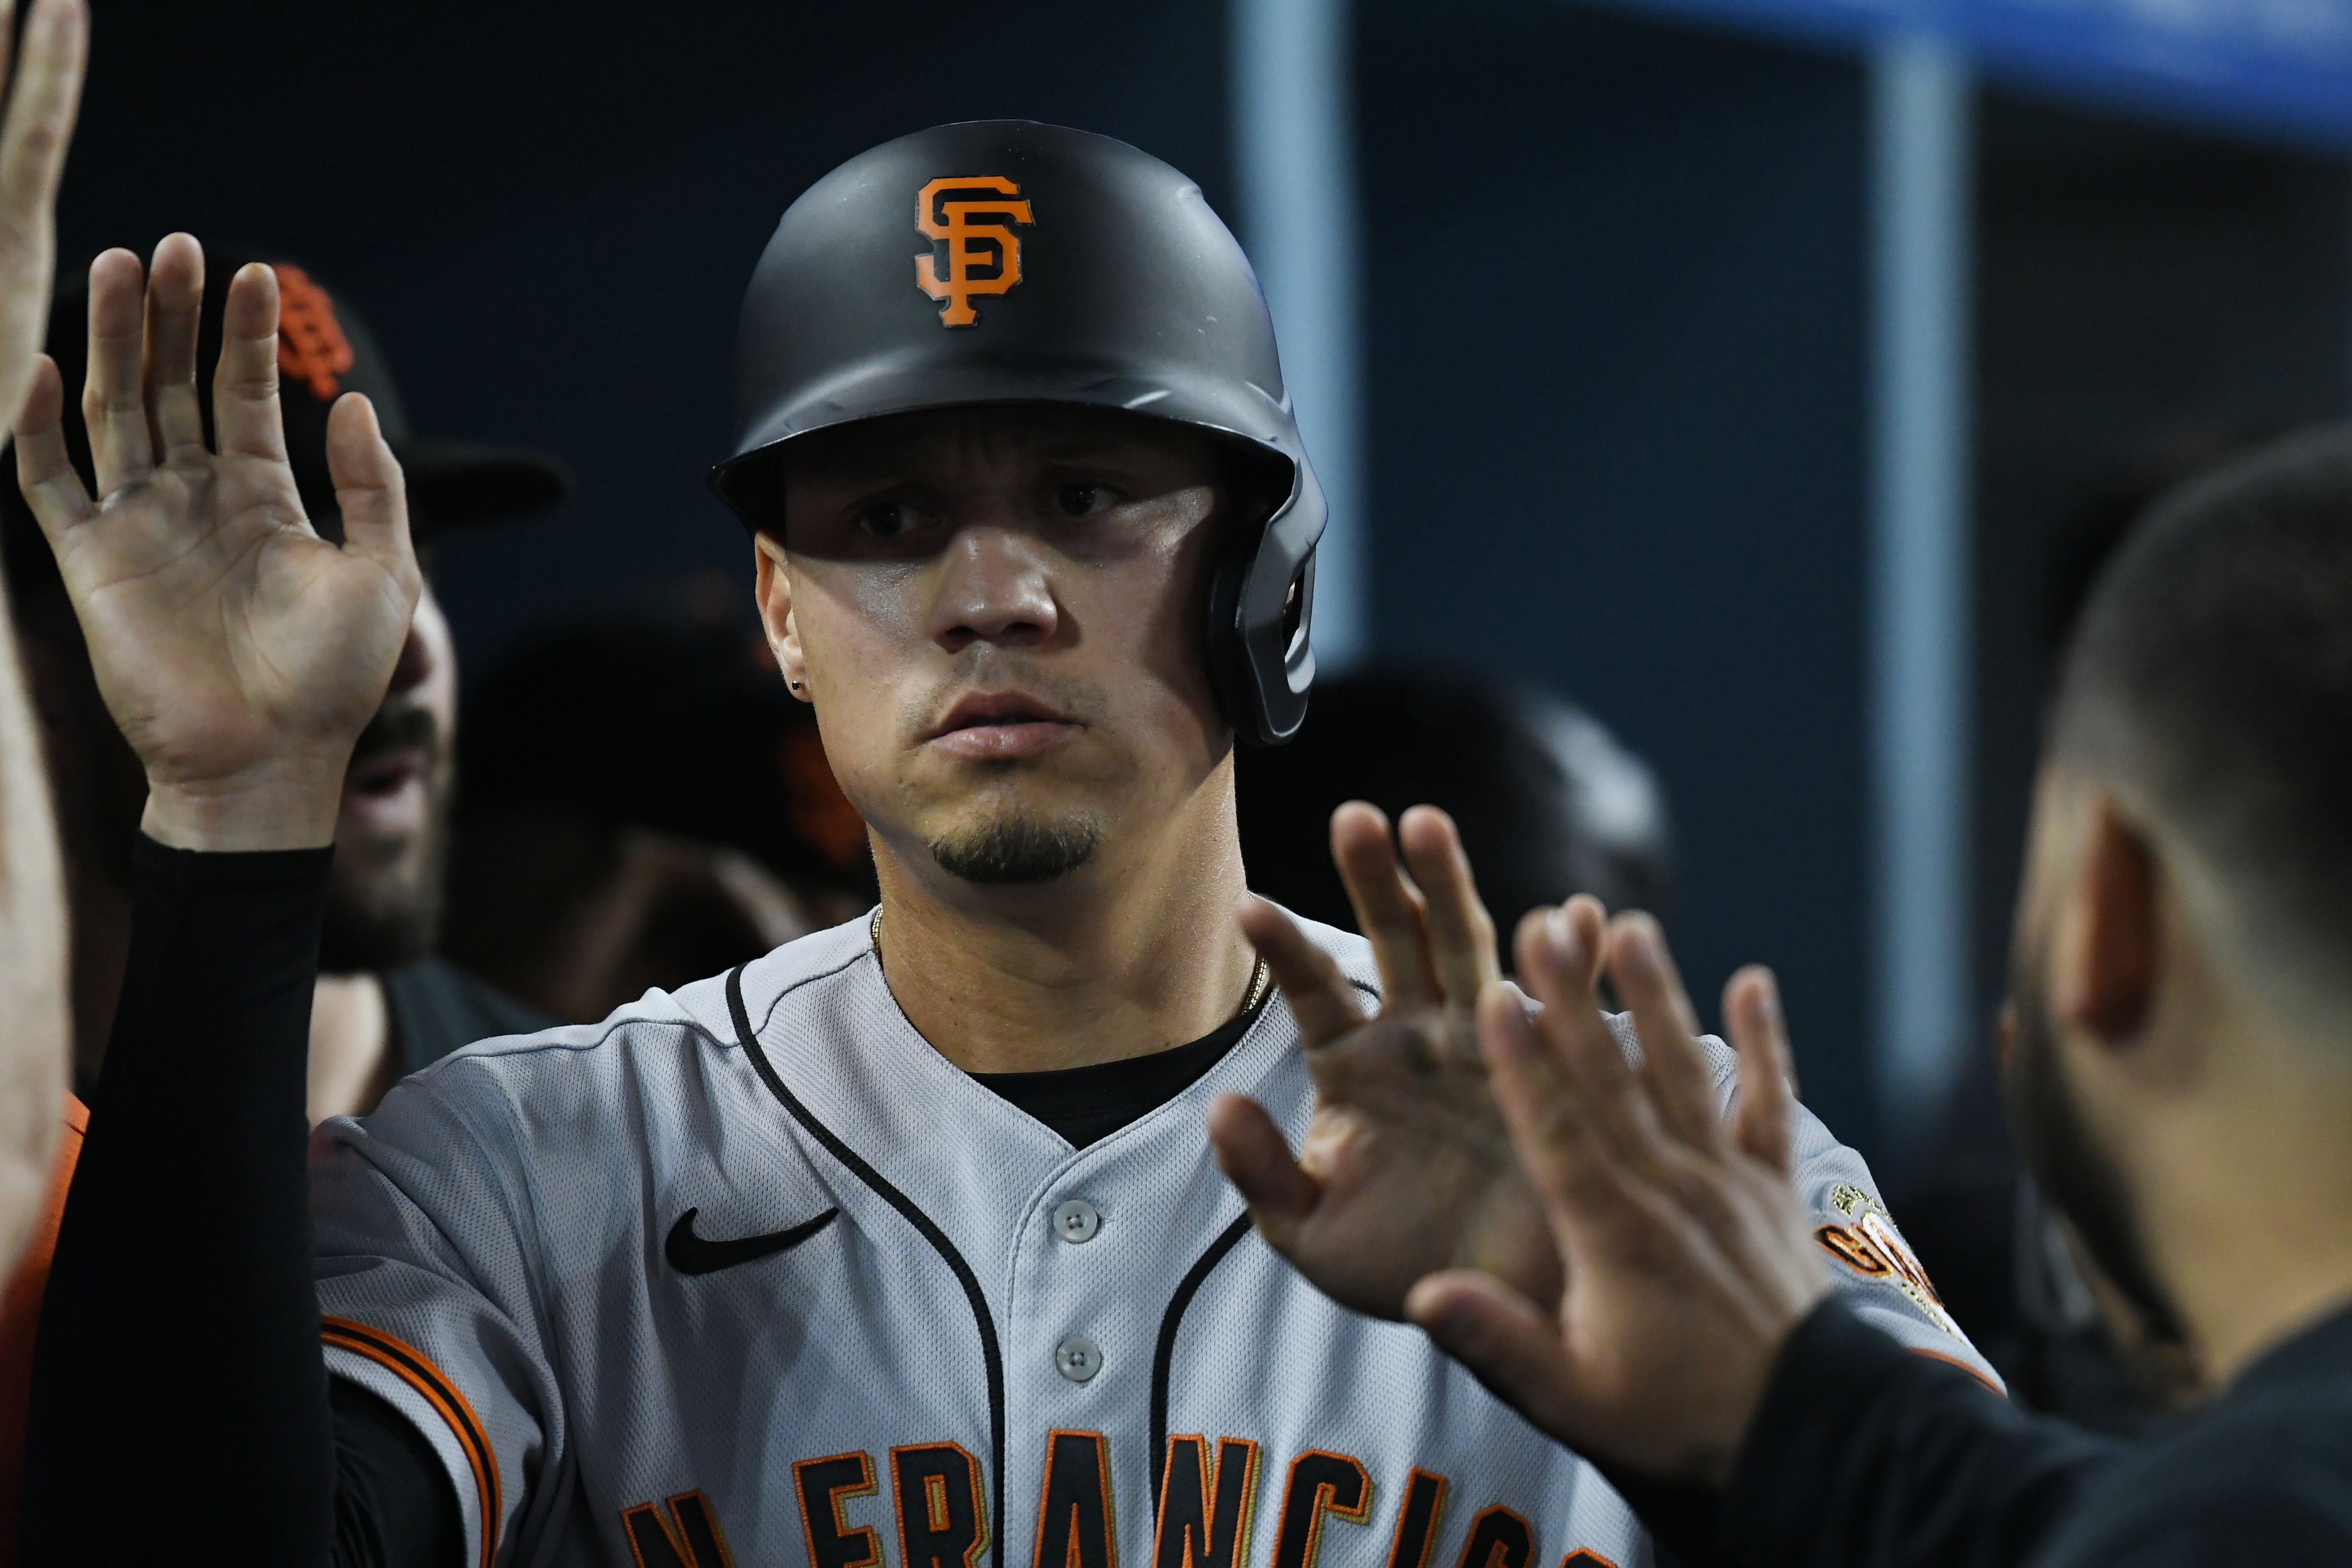 MLB Trade Rumors on X: Giants, Wilmer Flores Agree To Two-Year